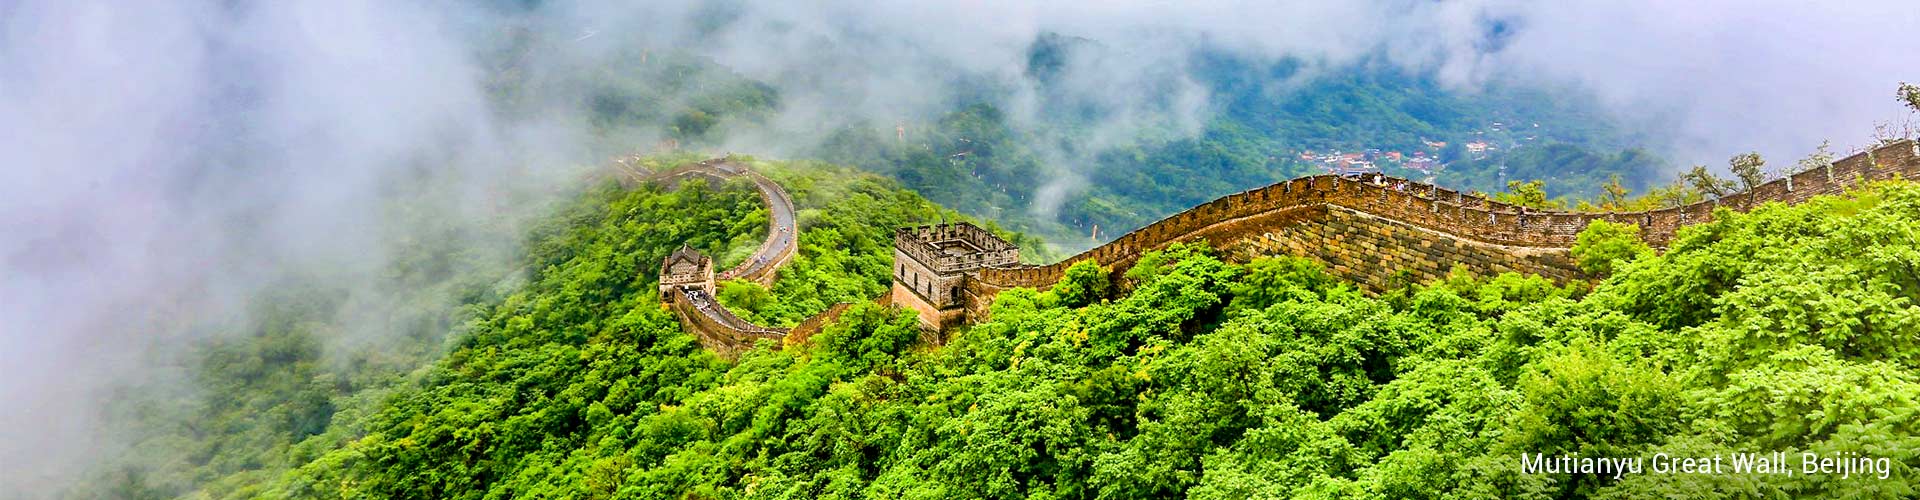 Marvel at the most spectacular scenery by hiking on the most historical Great Wall sections.